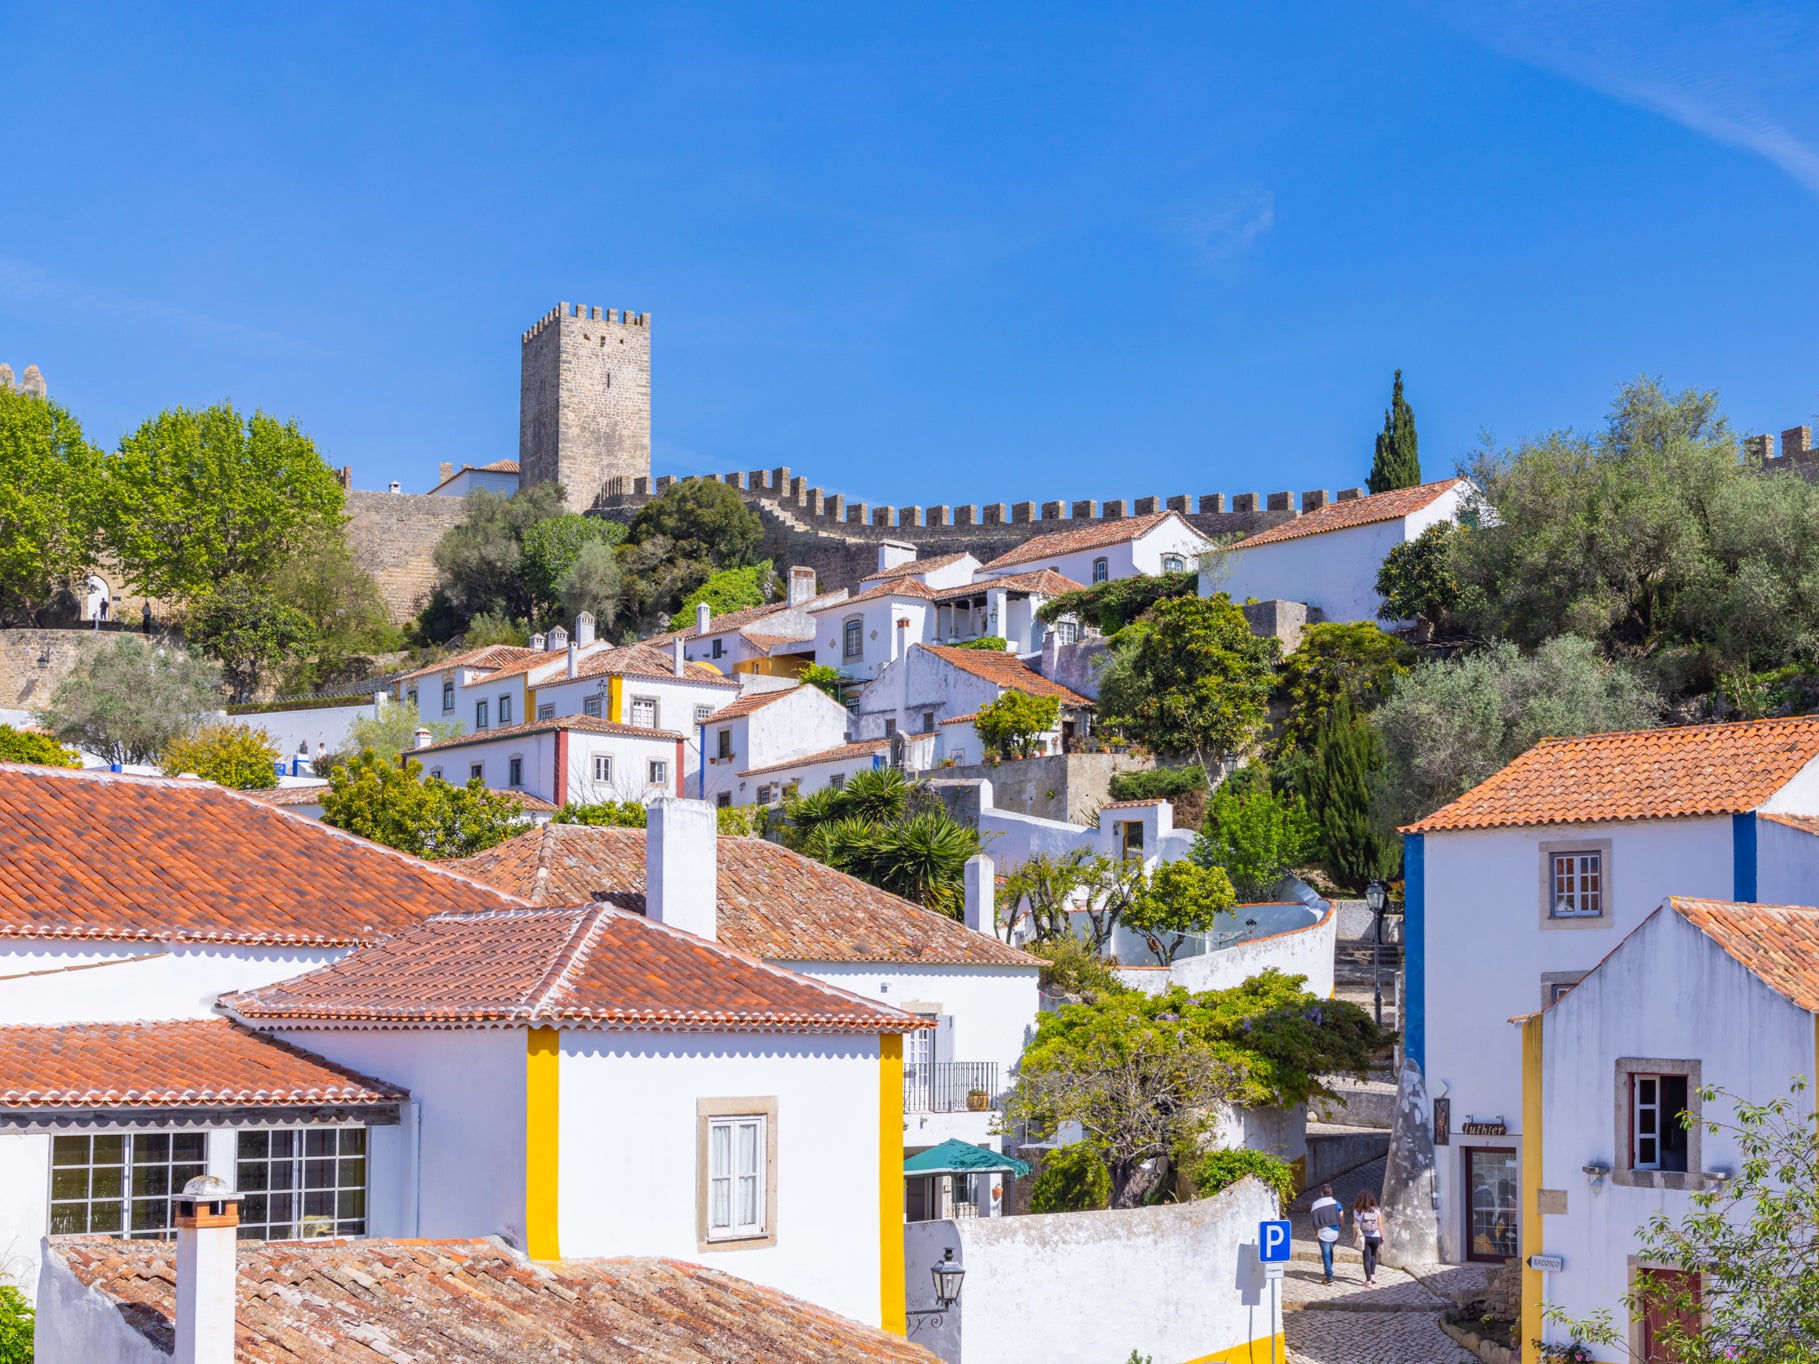 Obidos Castle is located in a picturesque setting